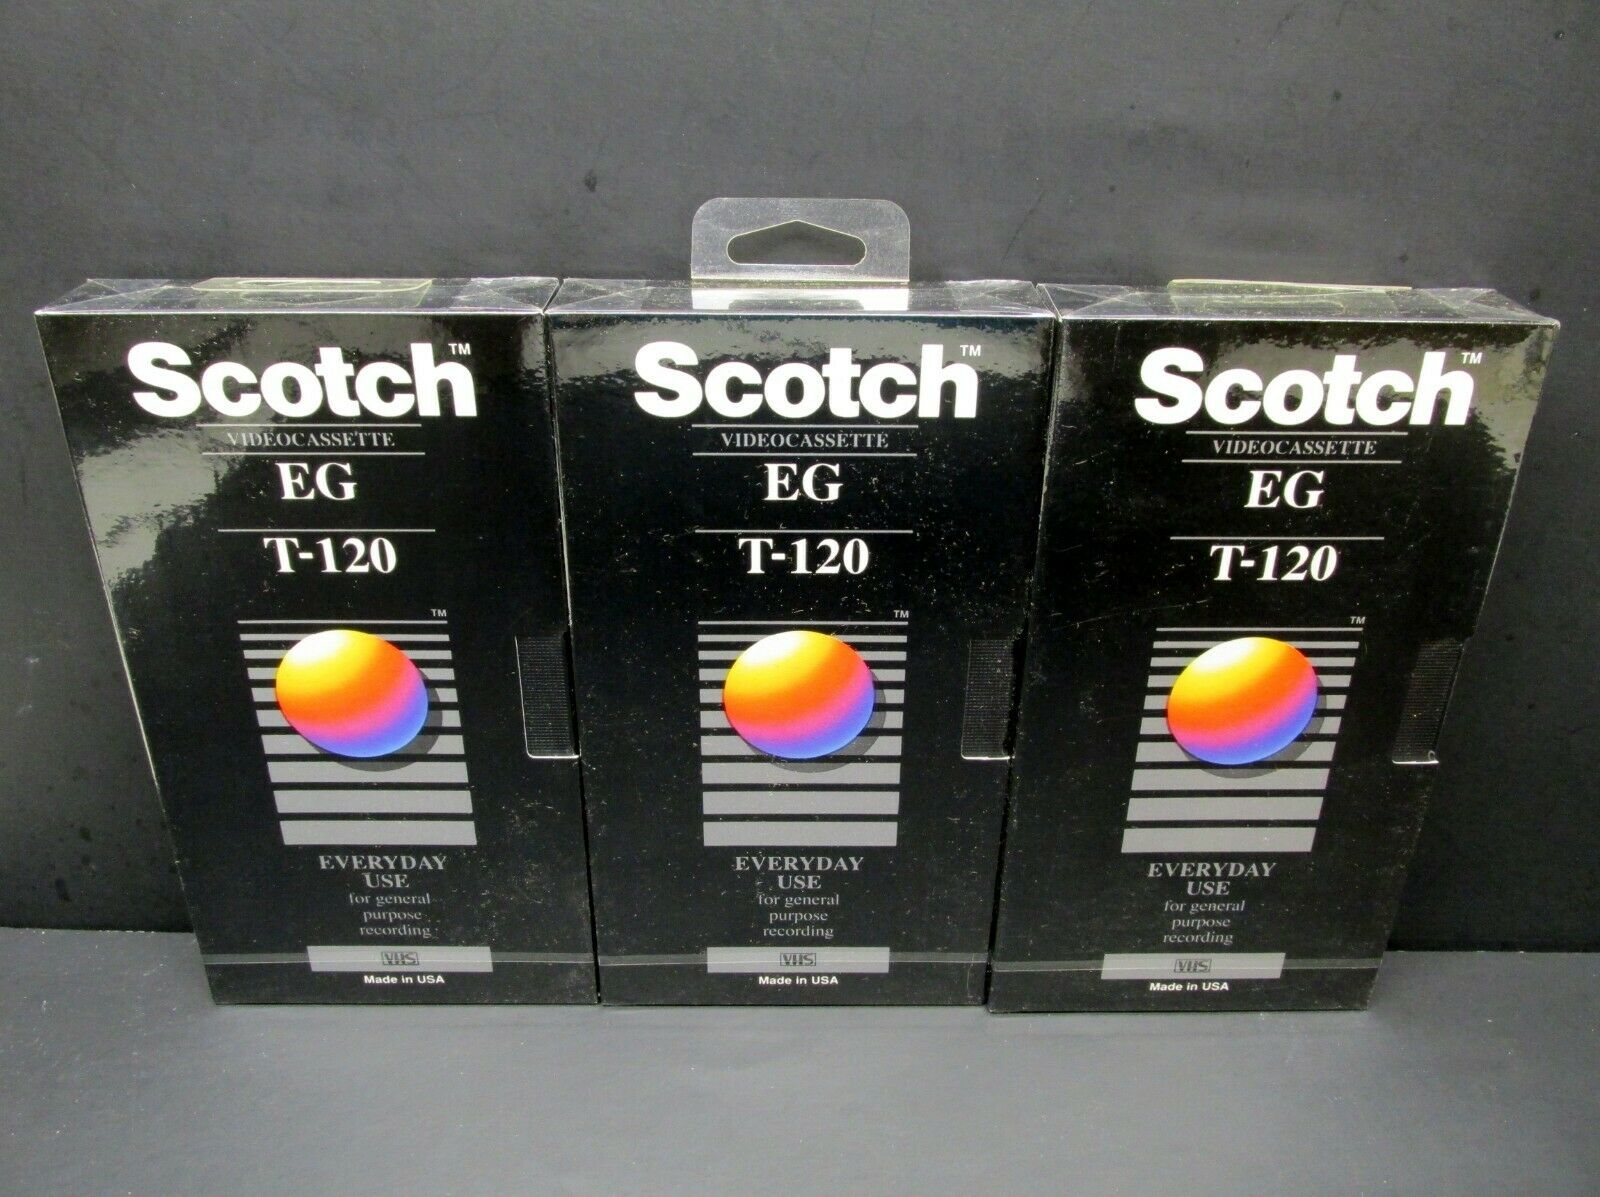 3 Scotch Eg T-120 6 Hour Blank Vhs Tapes, New & Sealed, Lot Of 3